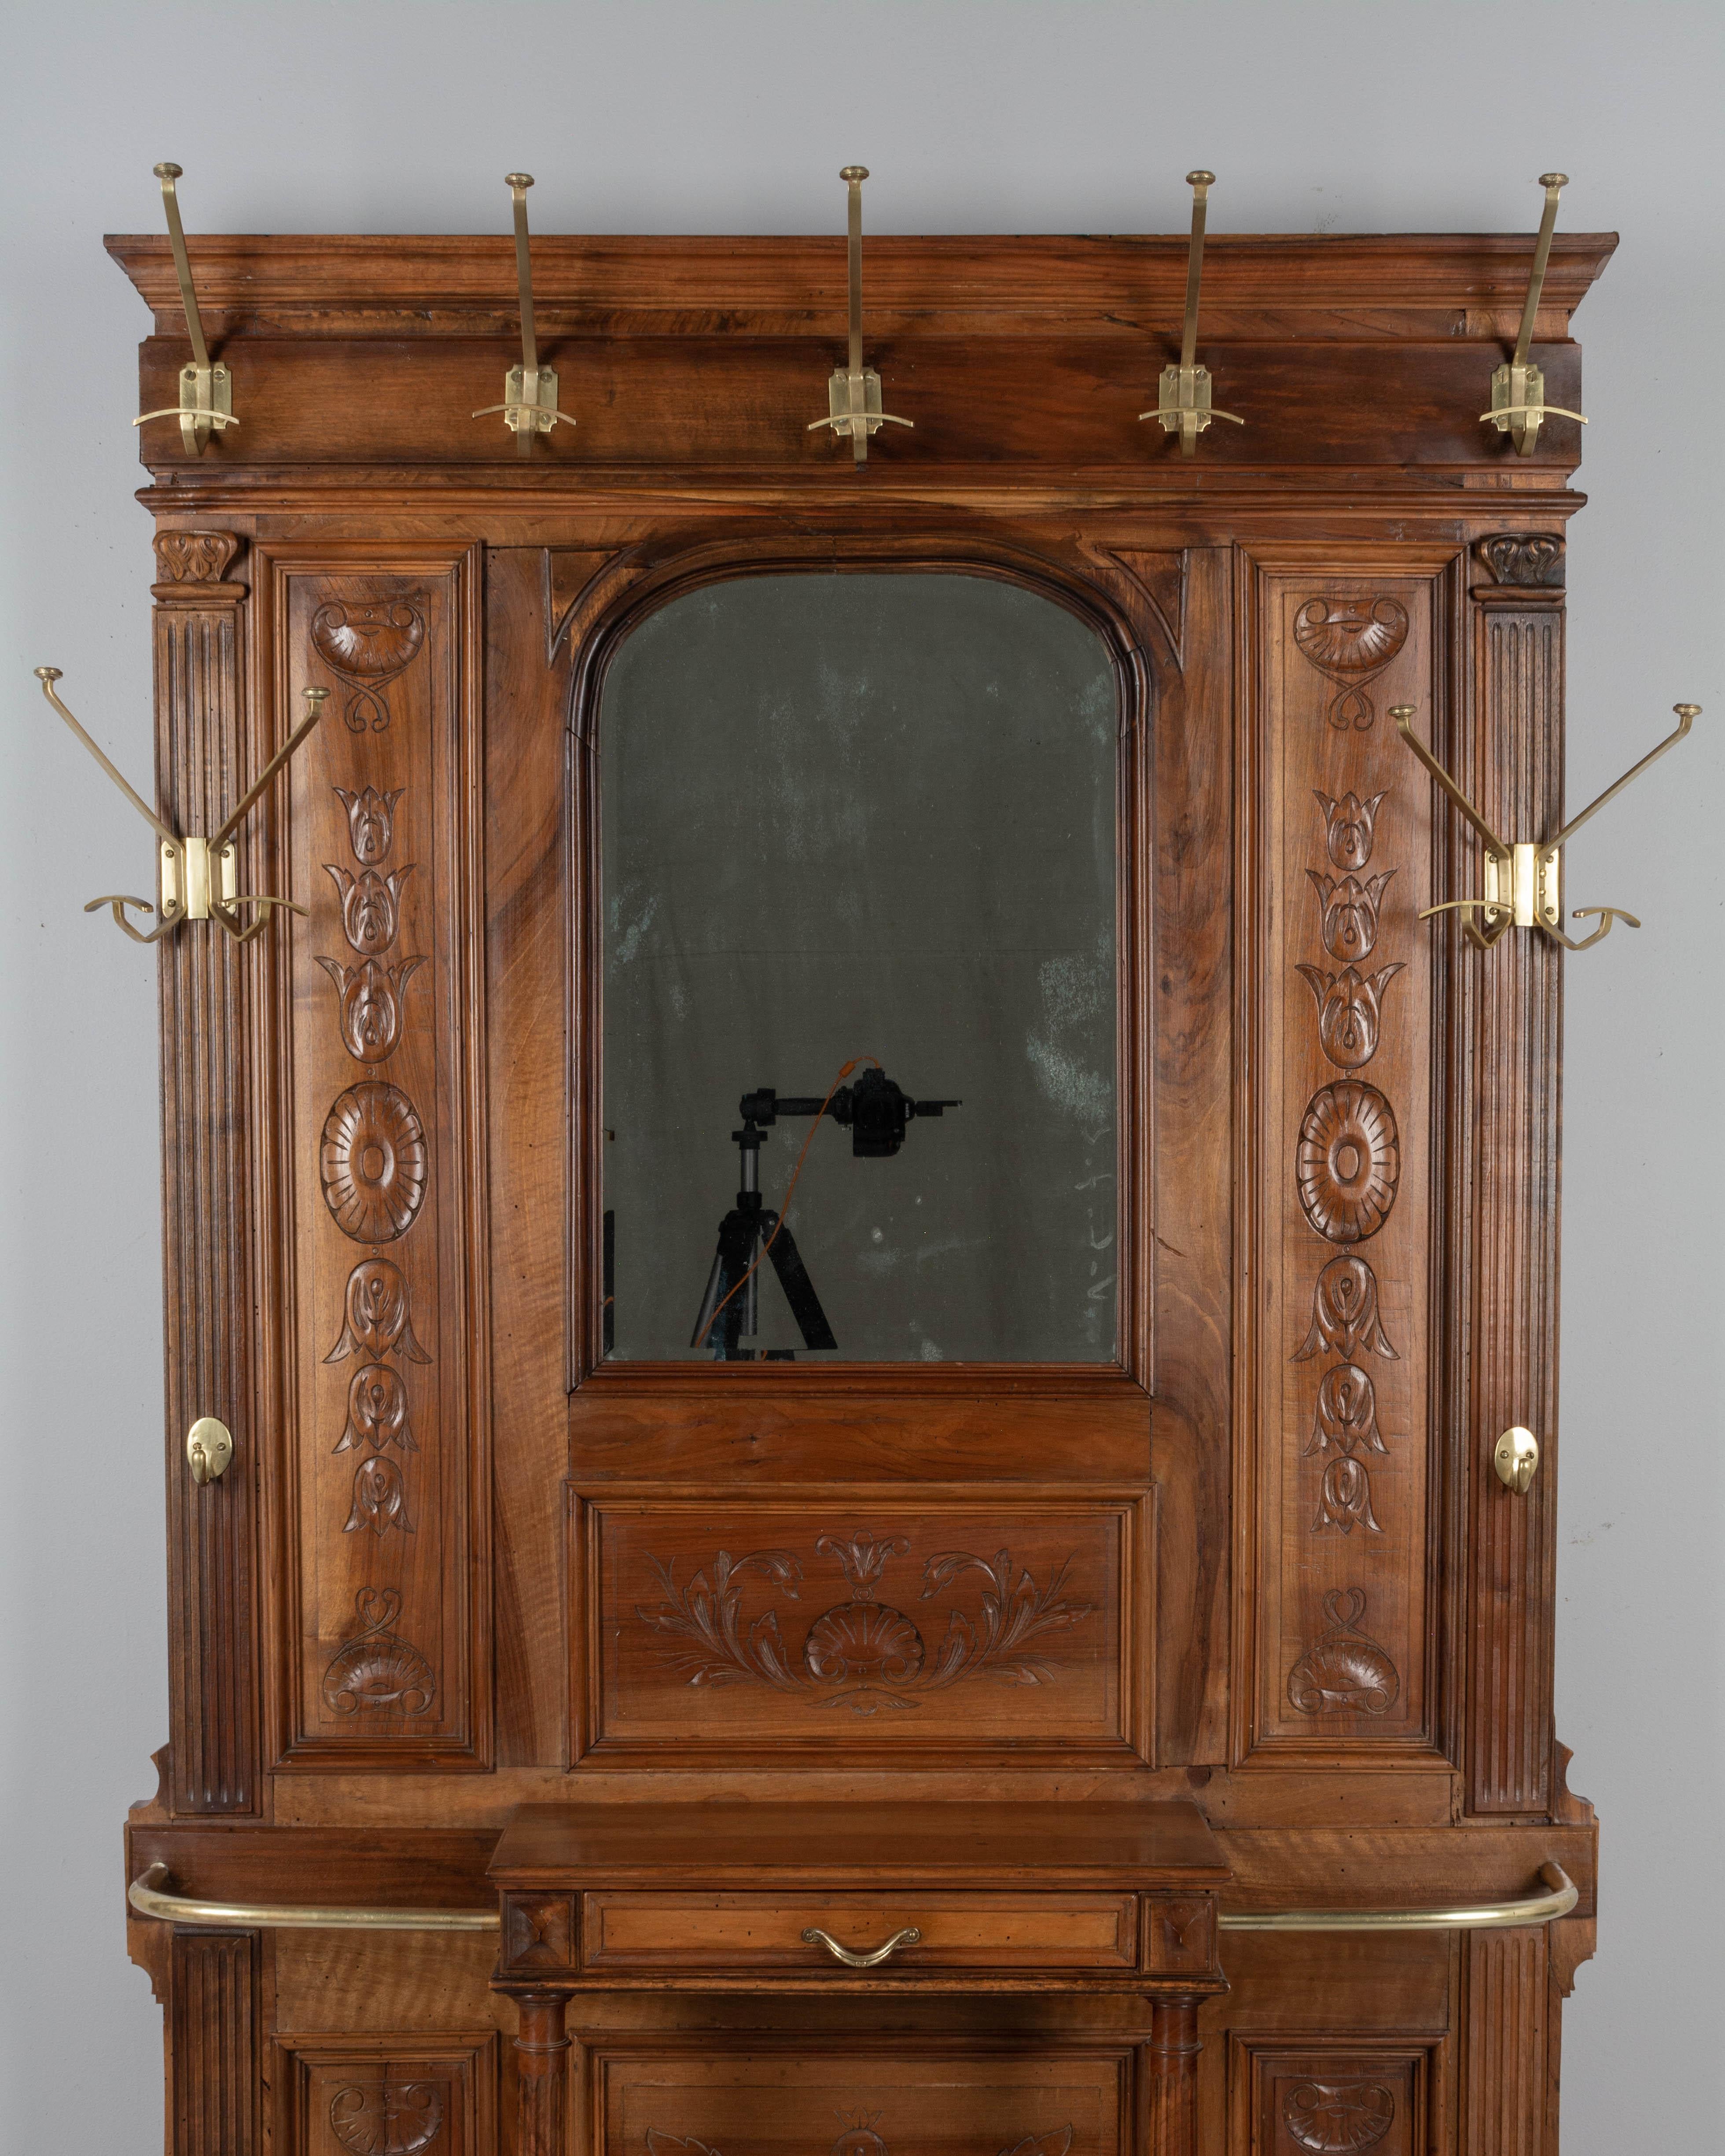 A Louis XVI style French entryway hall tree, or coat rack, with arched beveled mirror. Made of solid walnut with hand carved decorative panels and cast brass coat hooks. Dovetailed drawer for gloves in the center is supported by turned fluted